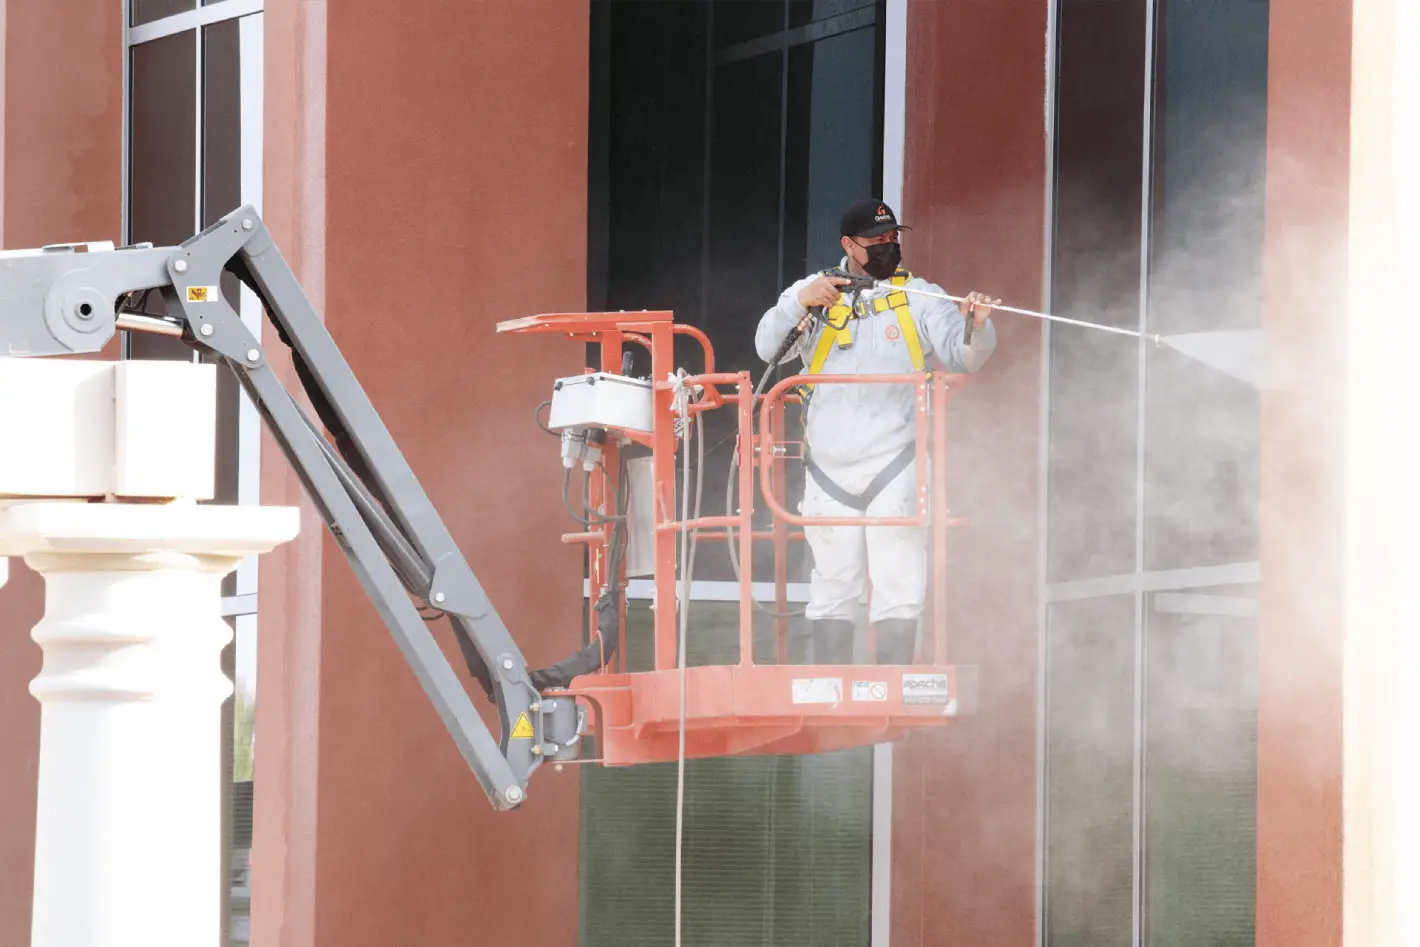 Painting a Commercial Building? Get the Best Results with Ghaster’s Expertise